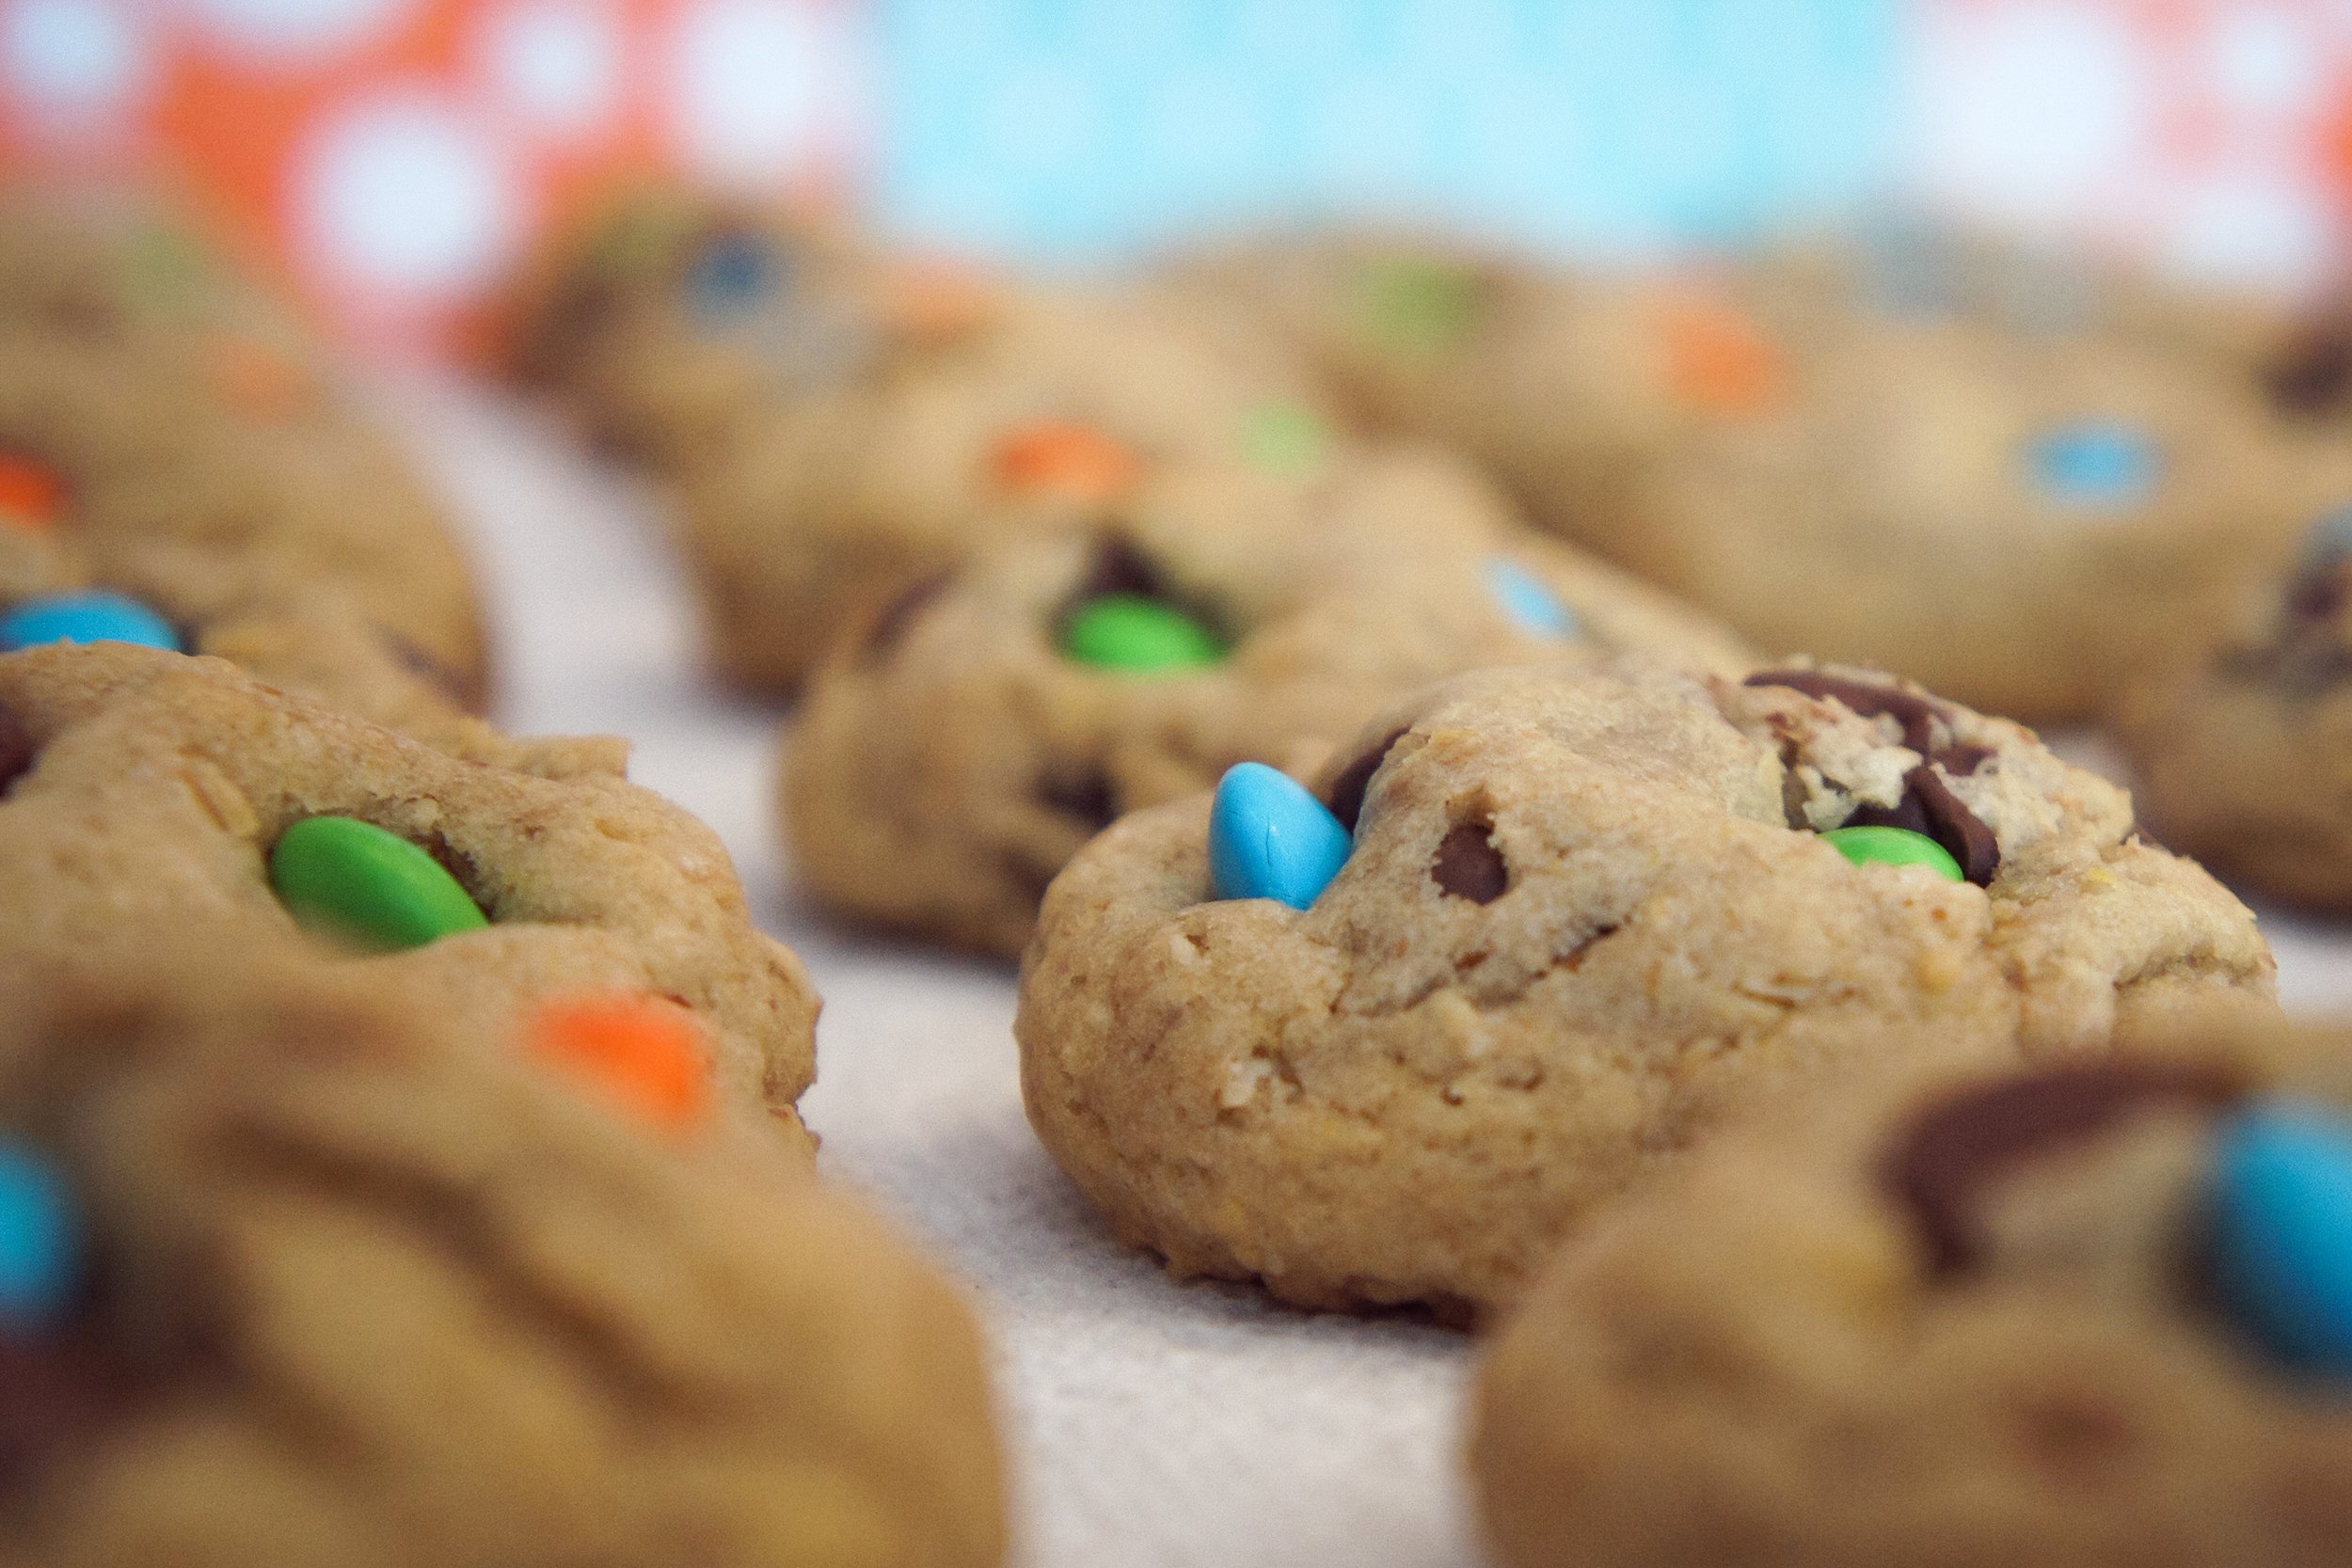 <p>Sprucing up regular chocolate chip cookies with colorful M&M's is an easy way to bring a classic to the next level. It's a common upgrade at the holidays, thanks to the festive look from seasonal bags of red and green candies, but it can add extra fun anytime. There's no special technique: Simply supplement the chocolate chips with M&M's.</p>  <p><b>Recipe:</b> <a href="https://www.crunchycreamysweet.com/soft-and-chewy-mm-chocolate-chip-cookies/">Crunchy Creamy Sweet</a></p>  <p><a href="https://blog.cheapism.com/best-cookie-recipes-18139/">The 20 Best Classic Cookie Recipes</a></p>